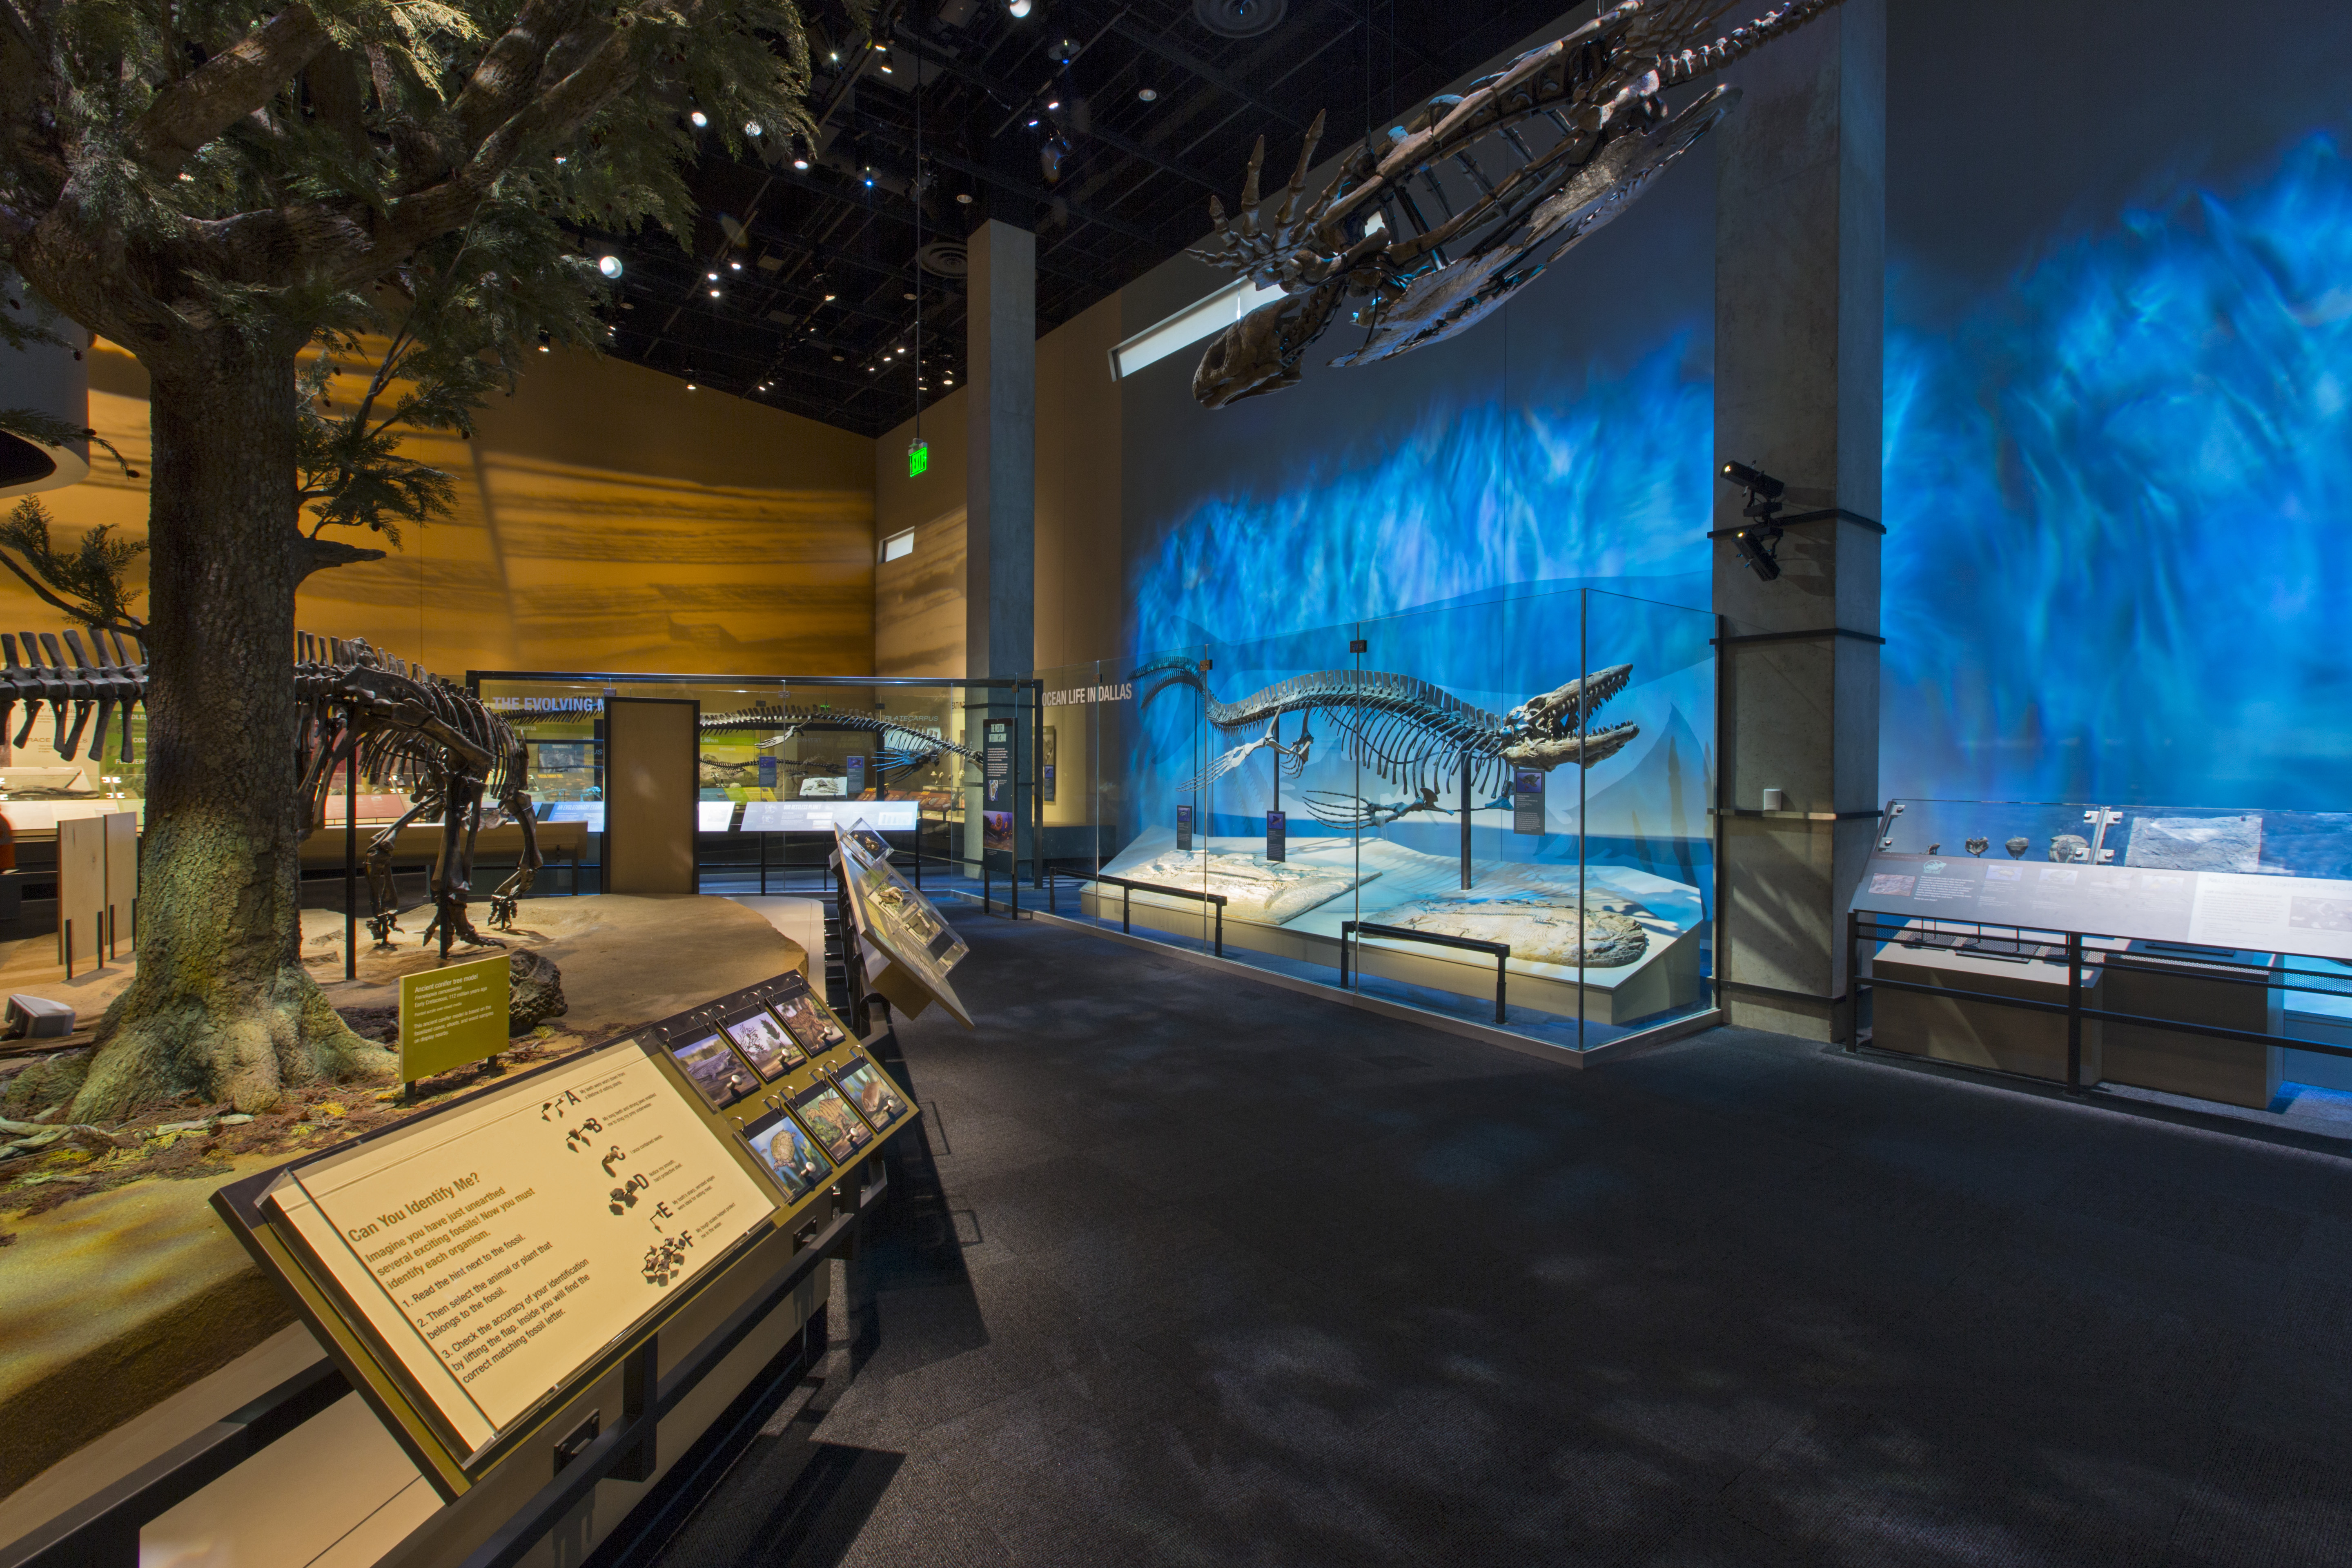 The Dallas Perot Museum of Science and Nature | Life of an Architect